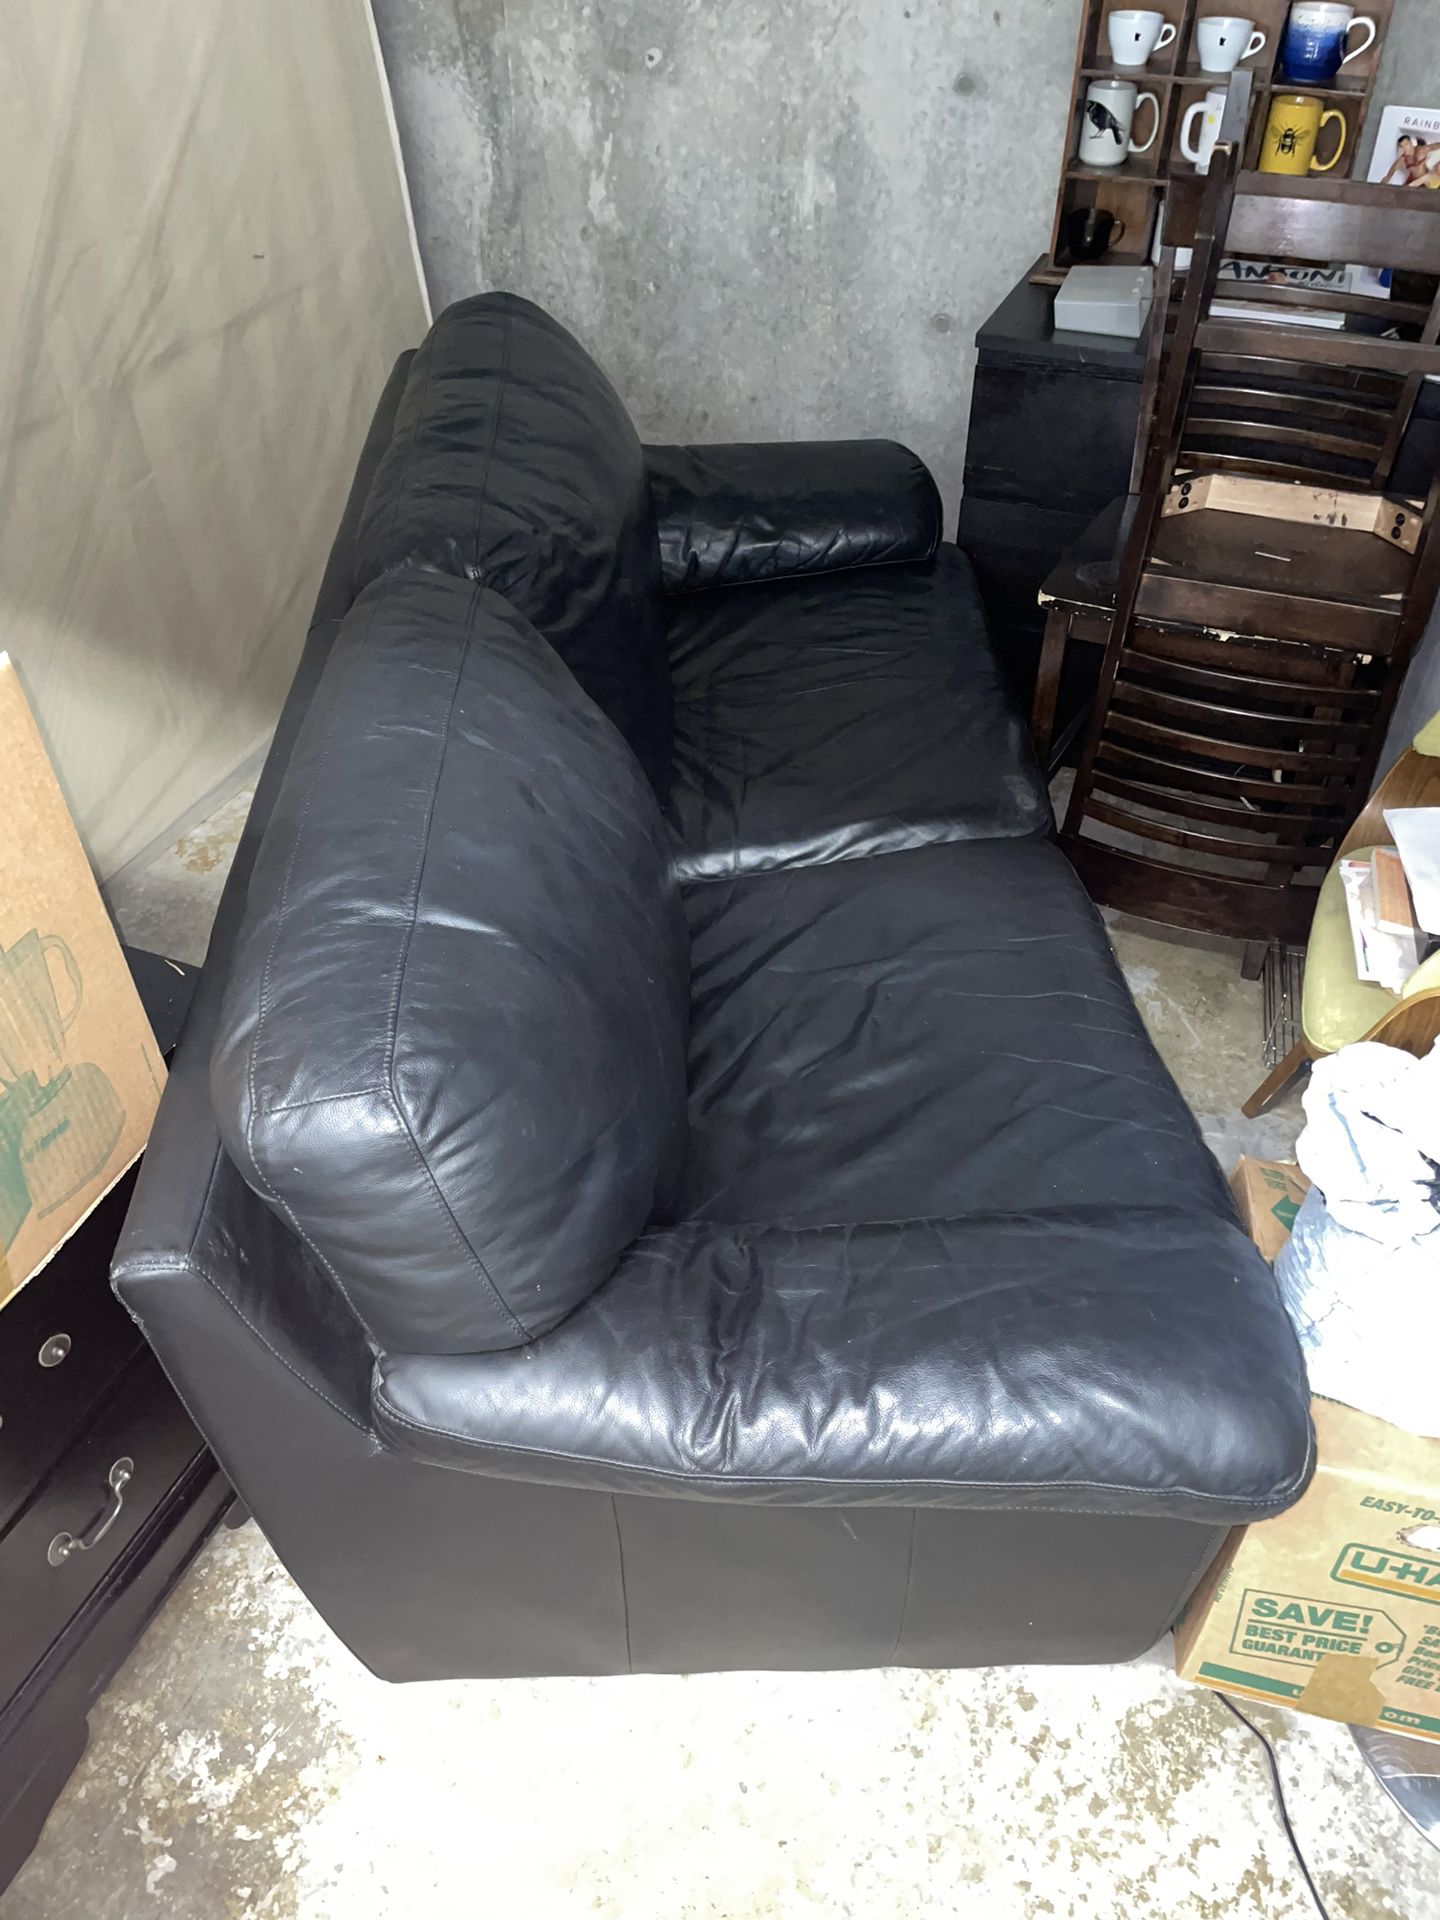 Black Leather Couch 6ft